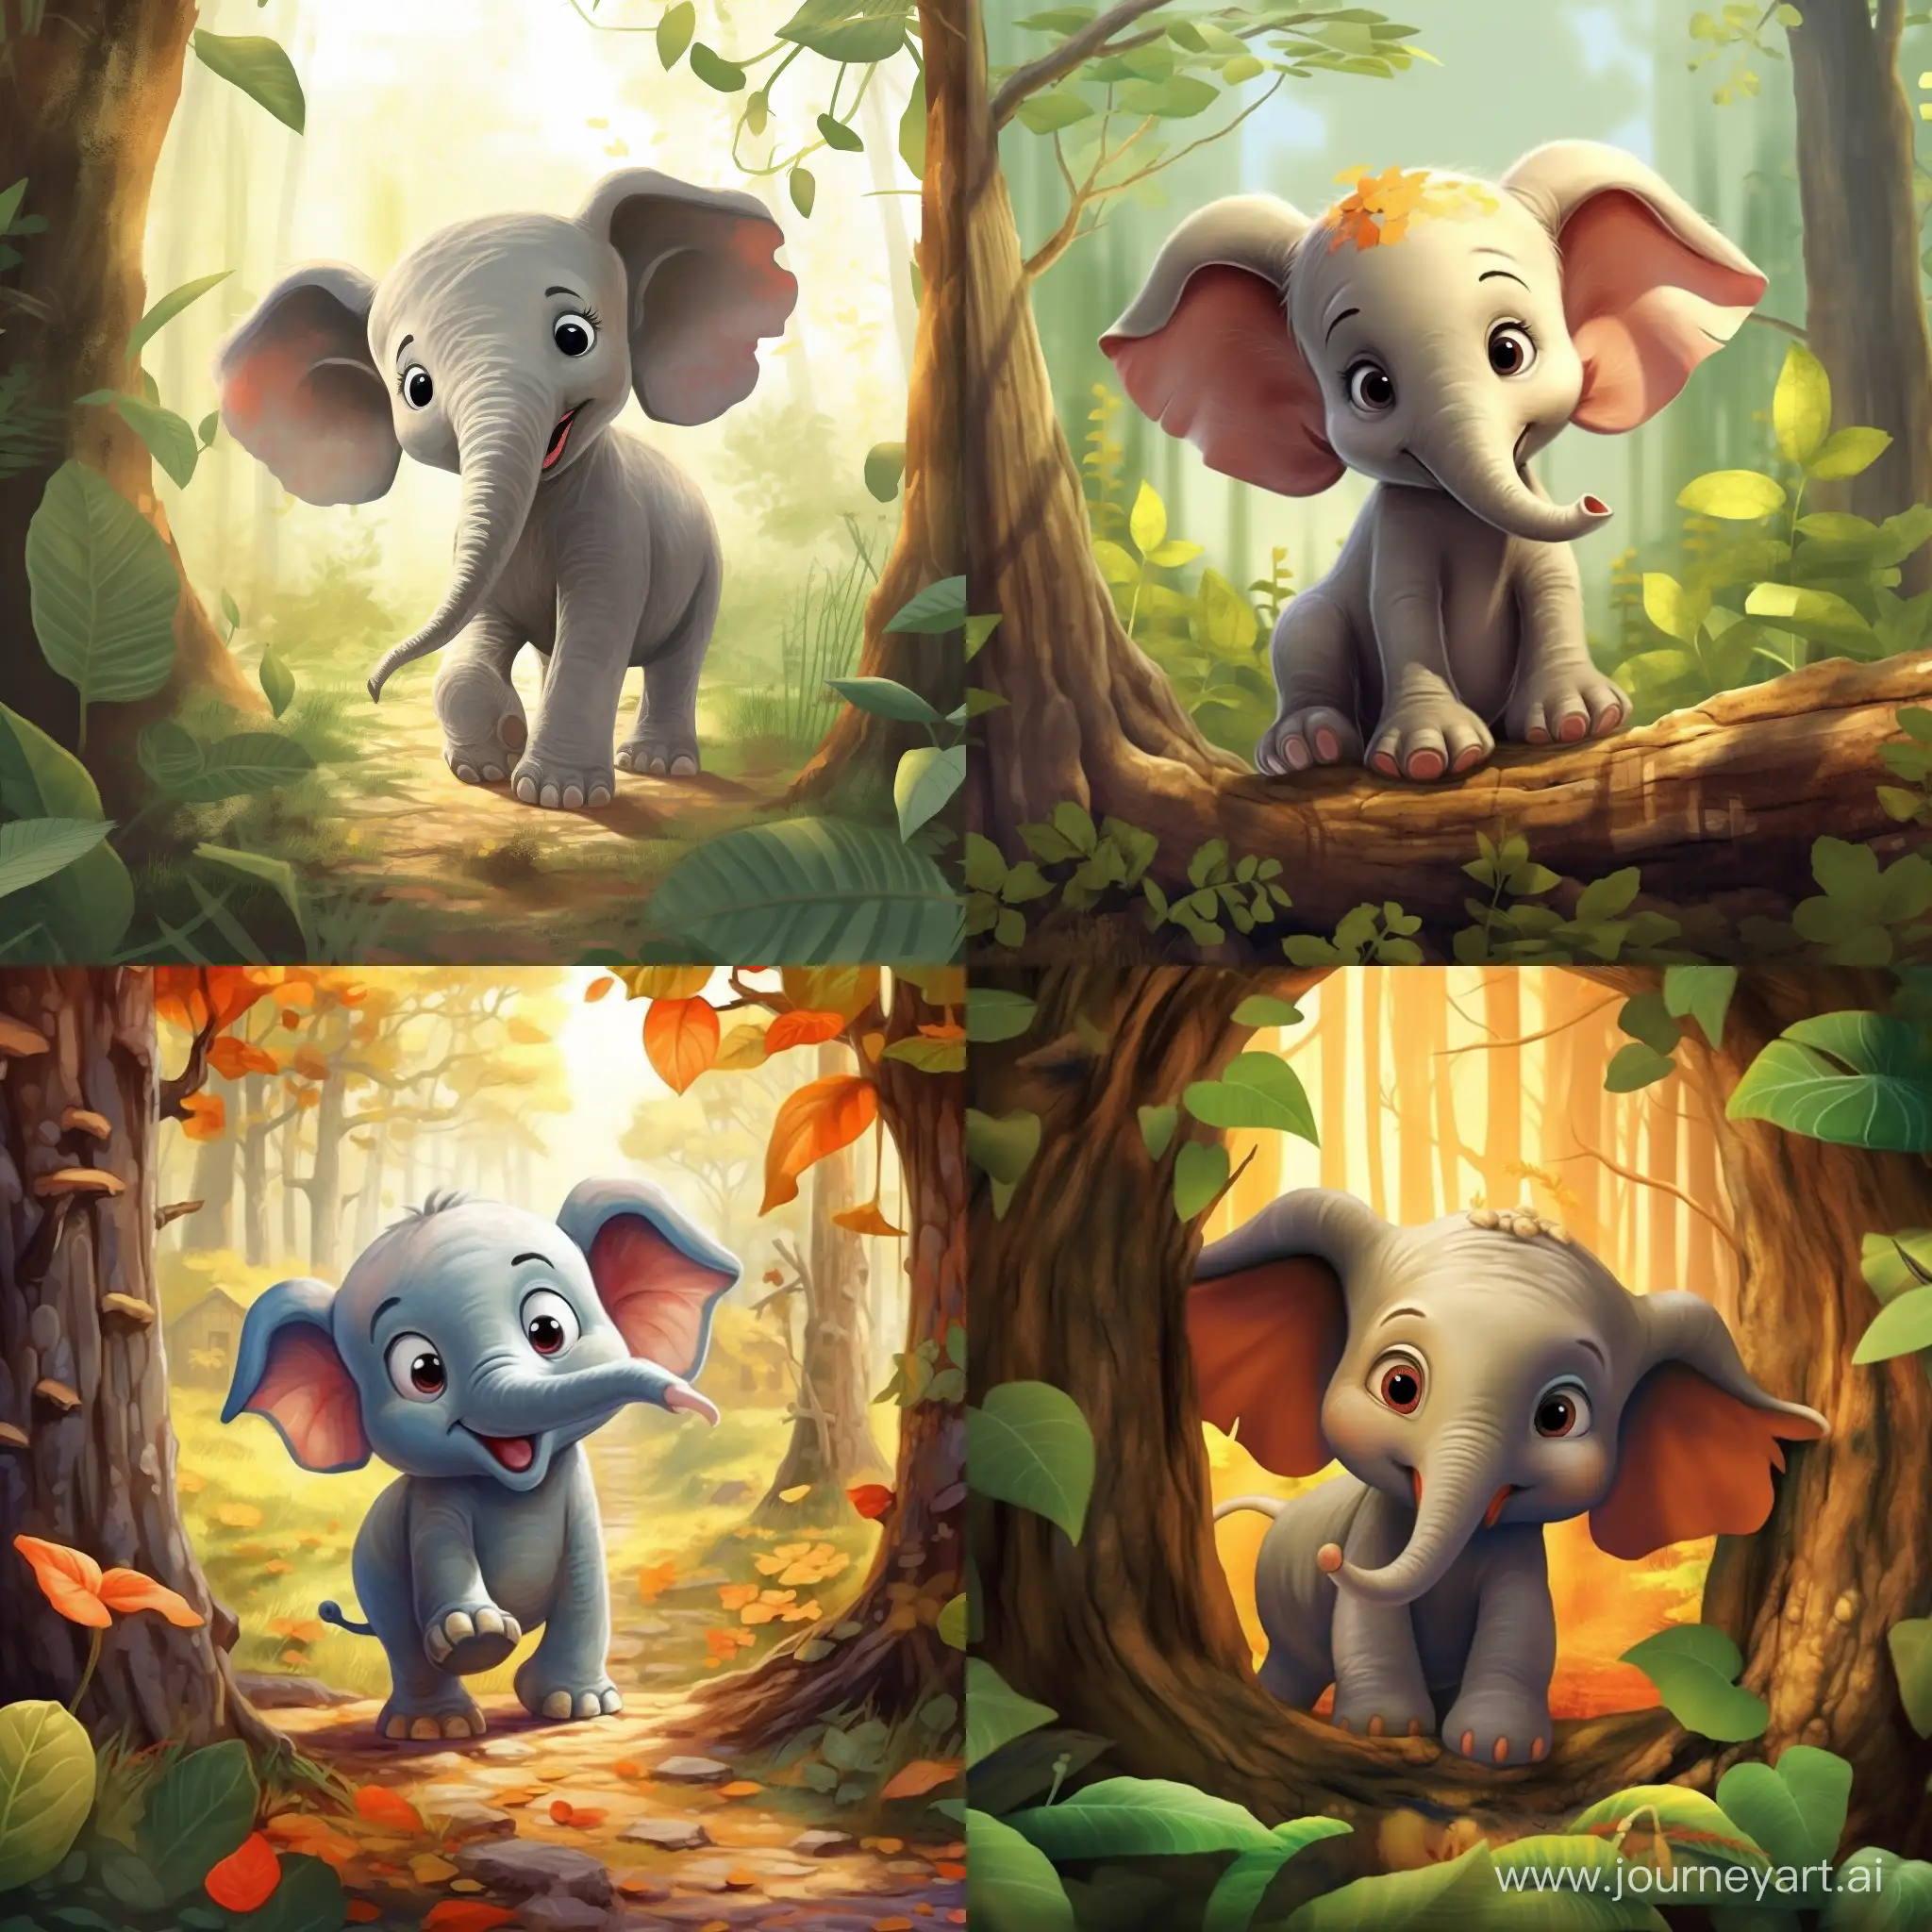 Once upon a time, Ellie the elephant lived in the forest near a small village. Ellie is a cute little elephant, and she always loved to play hide and seek with her friends, in cartoon style